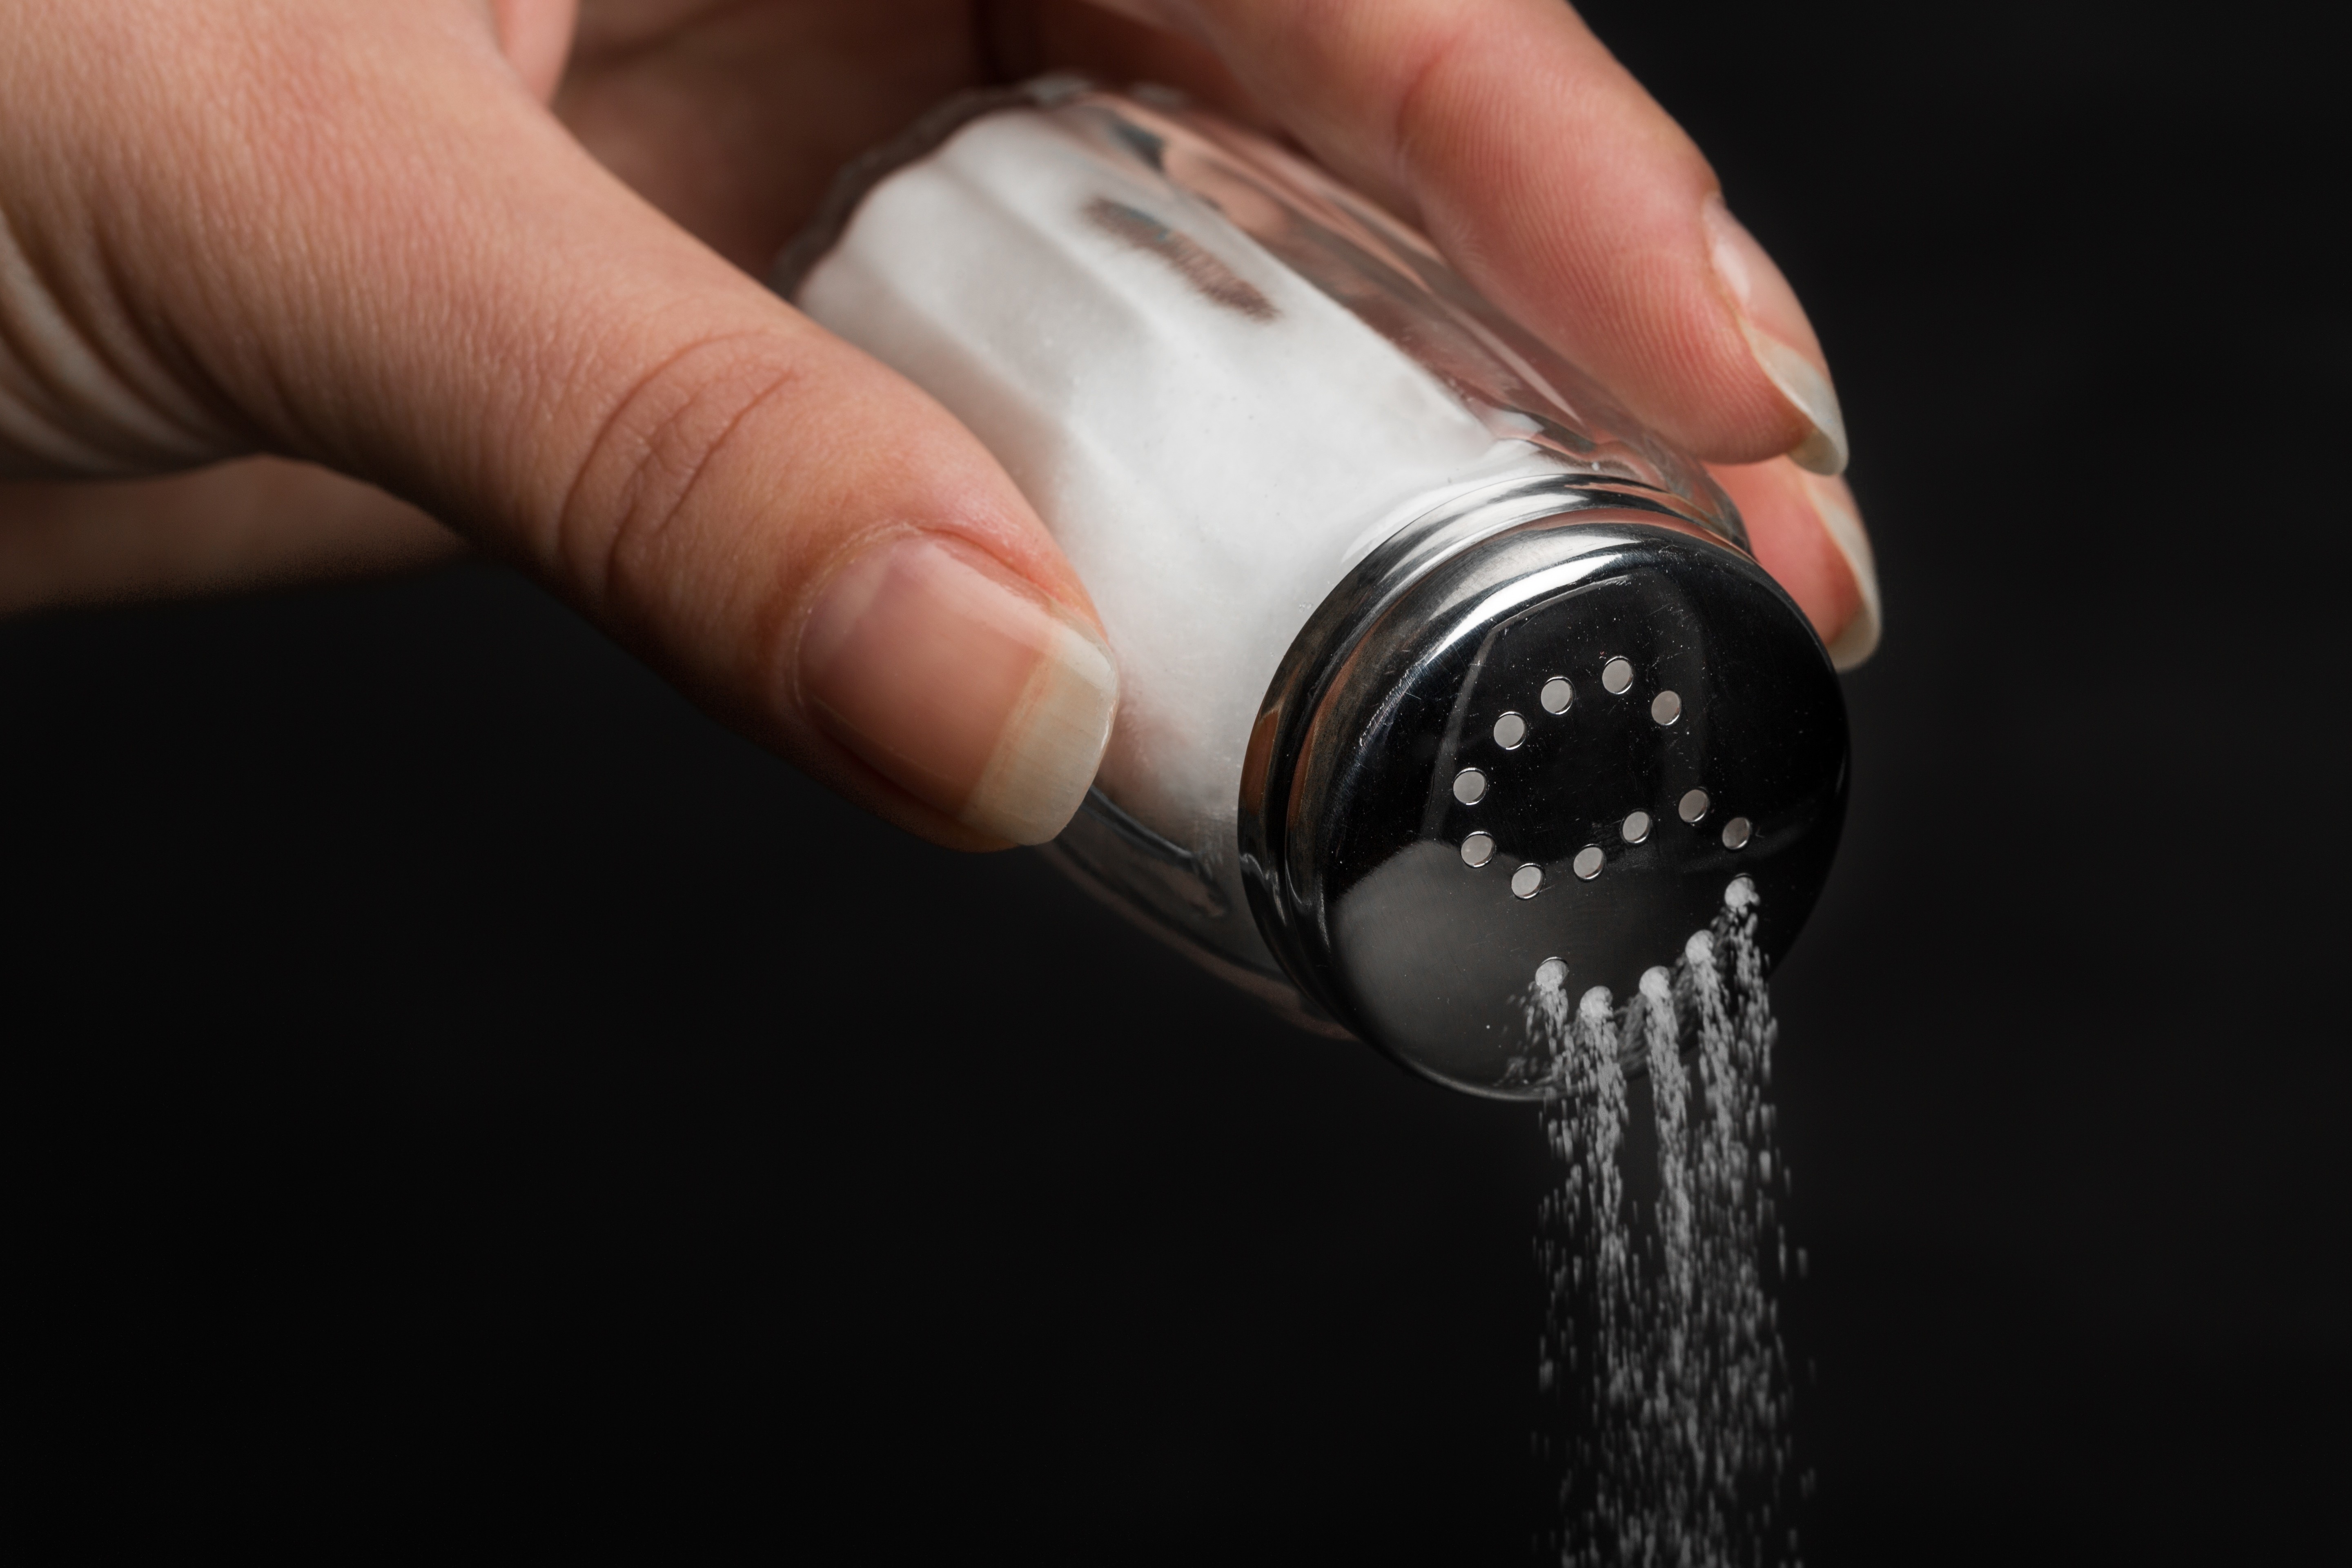 Eating too much salt is bad for you, doctors say, but it should only take six to eight weeks to get used to having less salt in your food. Photo: Shutterstock